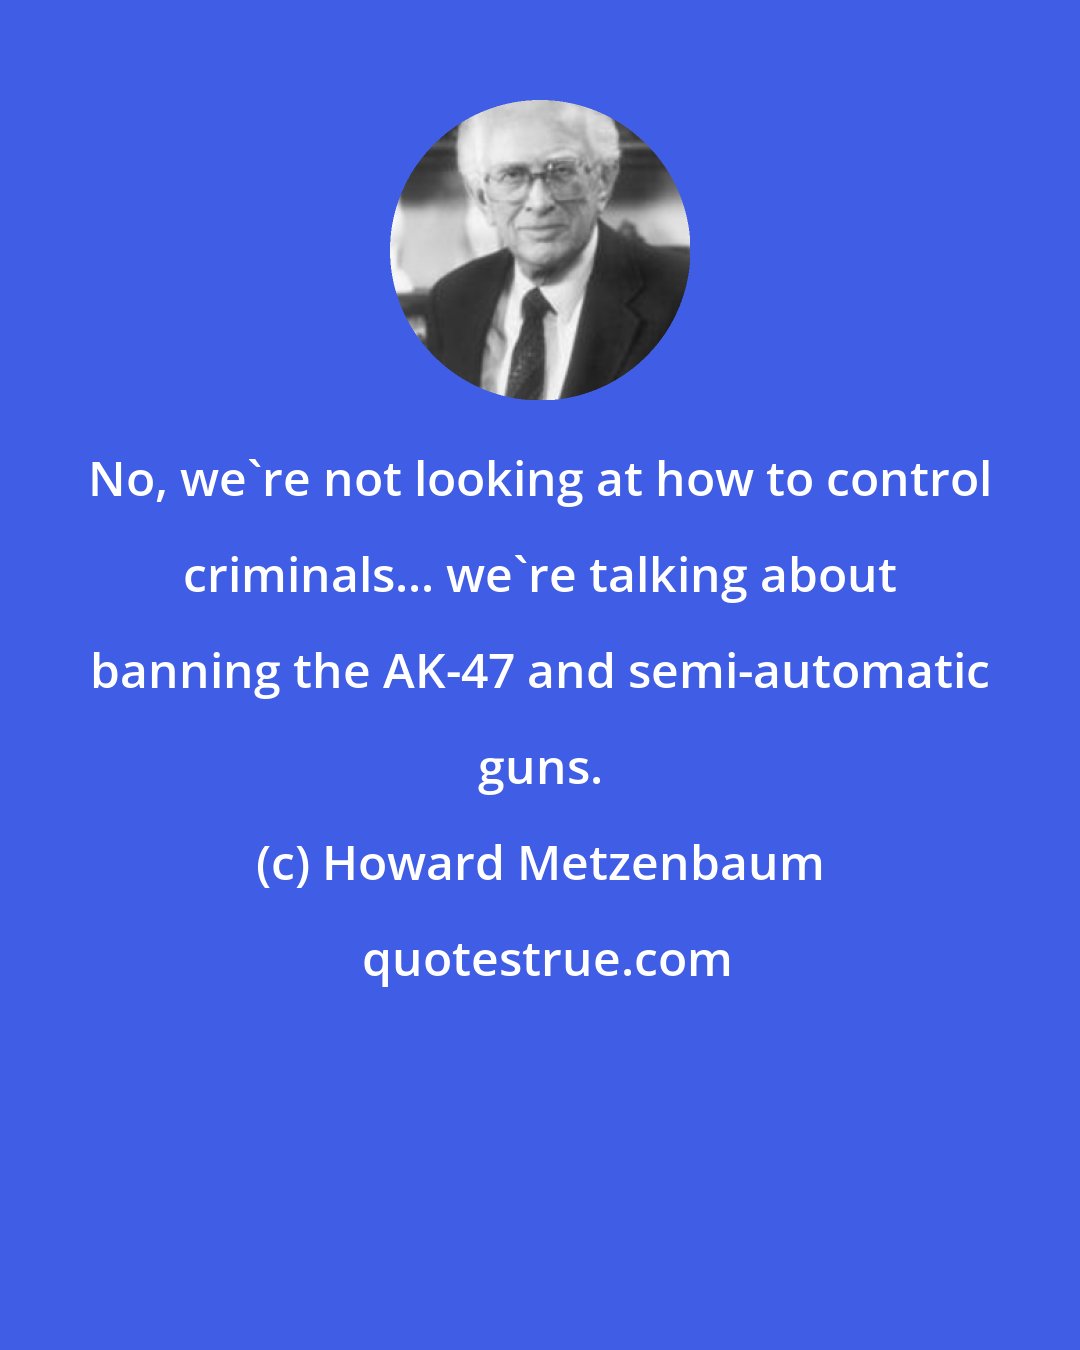 Howard Metzenbaum: No, we're not looking at how to control criminals... we're talking about banning the AK-47 and semi-automatic guns.